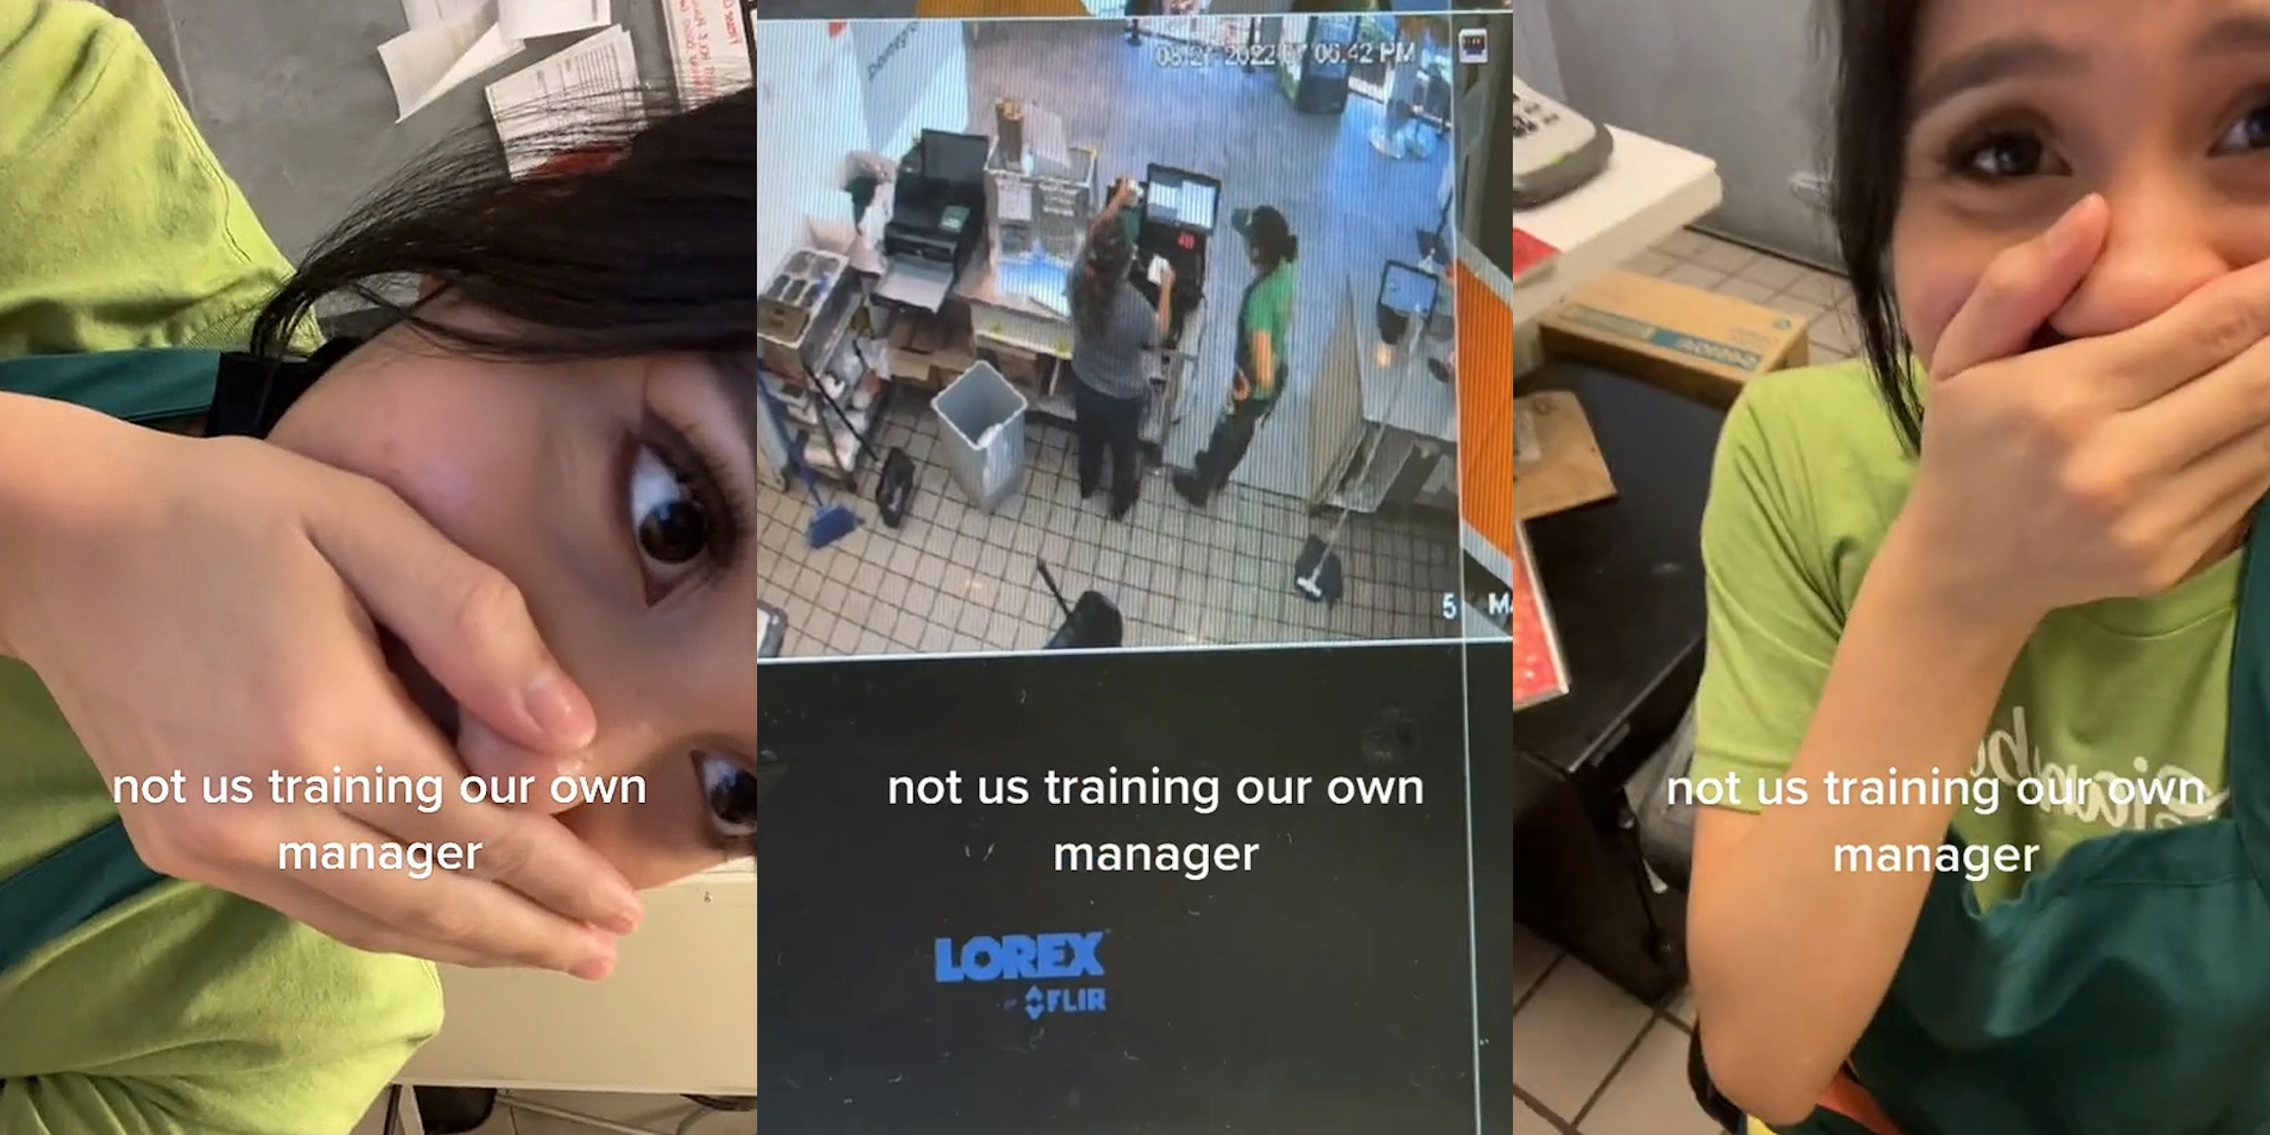 worker with hand on her mouth caption 'not us training our own manager' (l) security camera footage of worker helping manager with computer screen caption 'not us training our own manager' (c) worker with hand on her mouth caption 'not us training our own manager' (r)